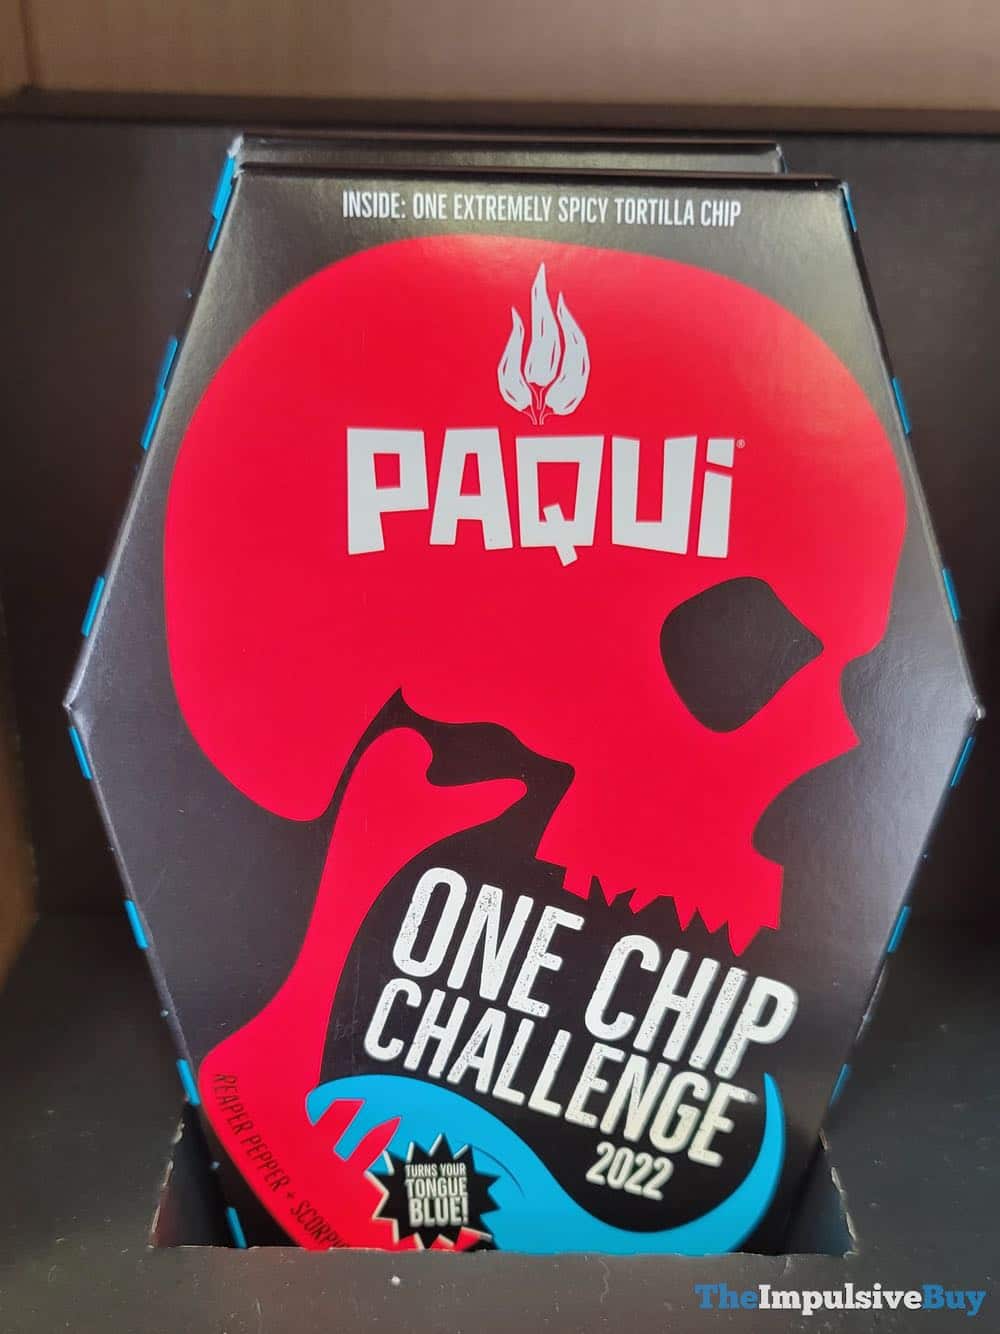 Eating Paqui 2022 & 2021 At The Same Time! World's Hottest Chip - Spicy  Food One Chip Challenge 